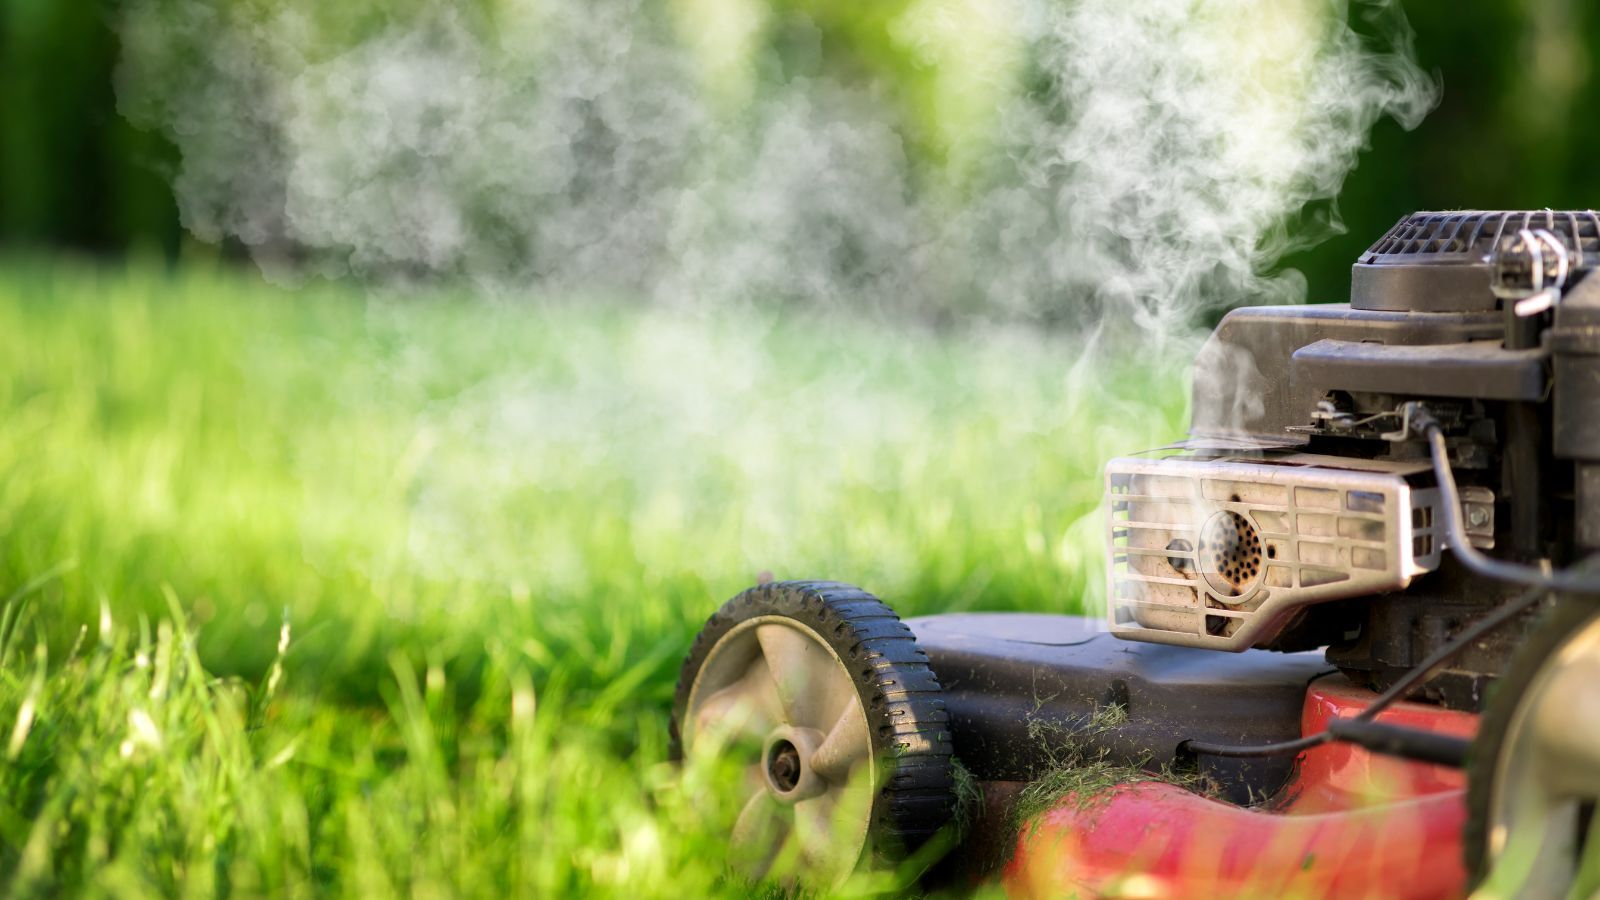 White Smoke from Lawn Mower (Why + How to Fix)